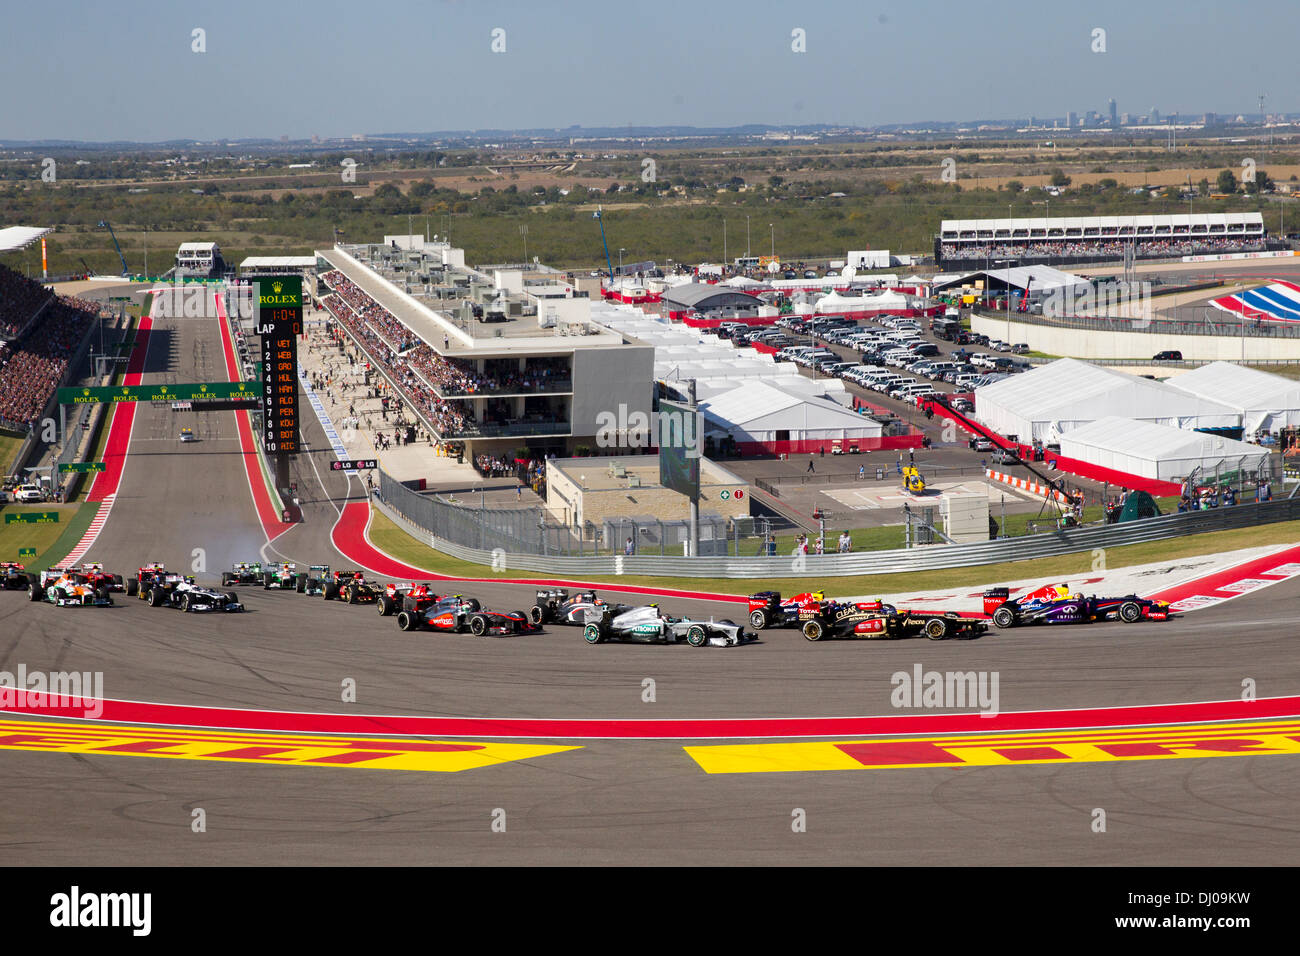 The first lap of the Formula 1 United States Grand Prix at the Circuit of the Americas track near Austin, TX. Stock Photo